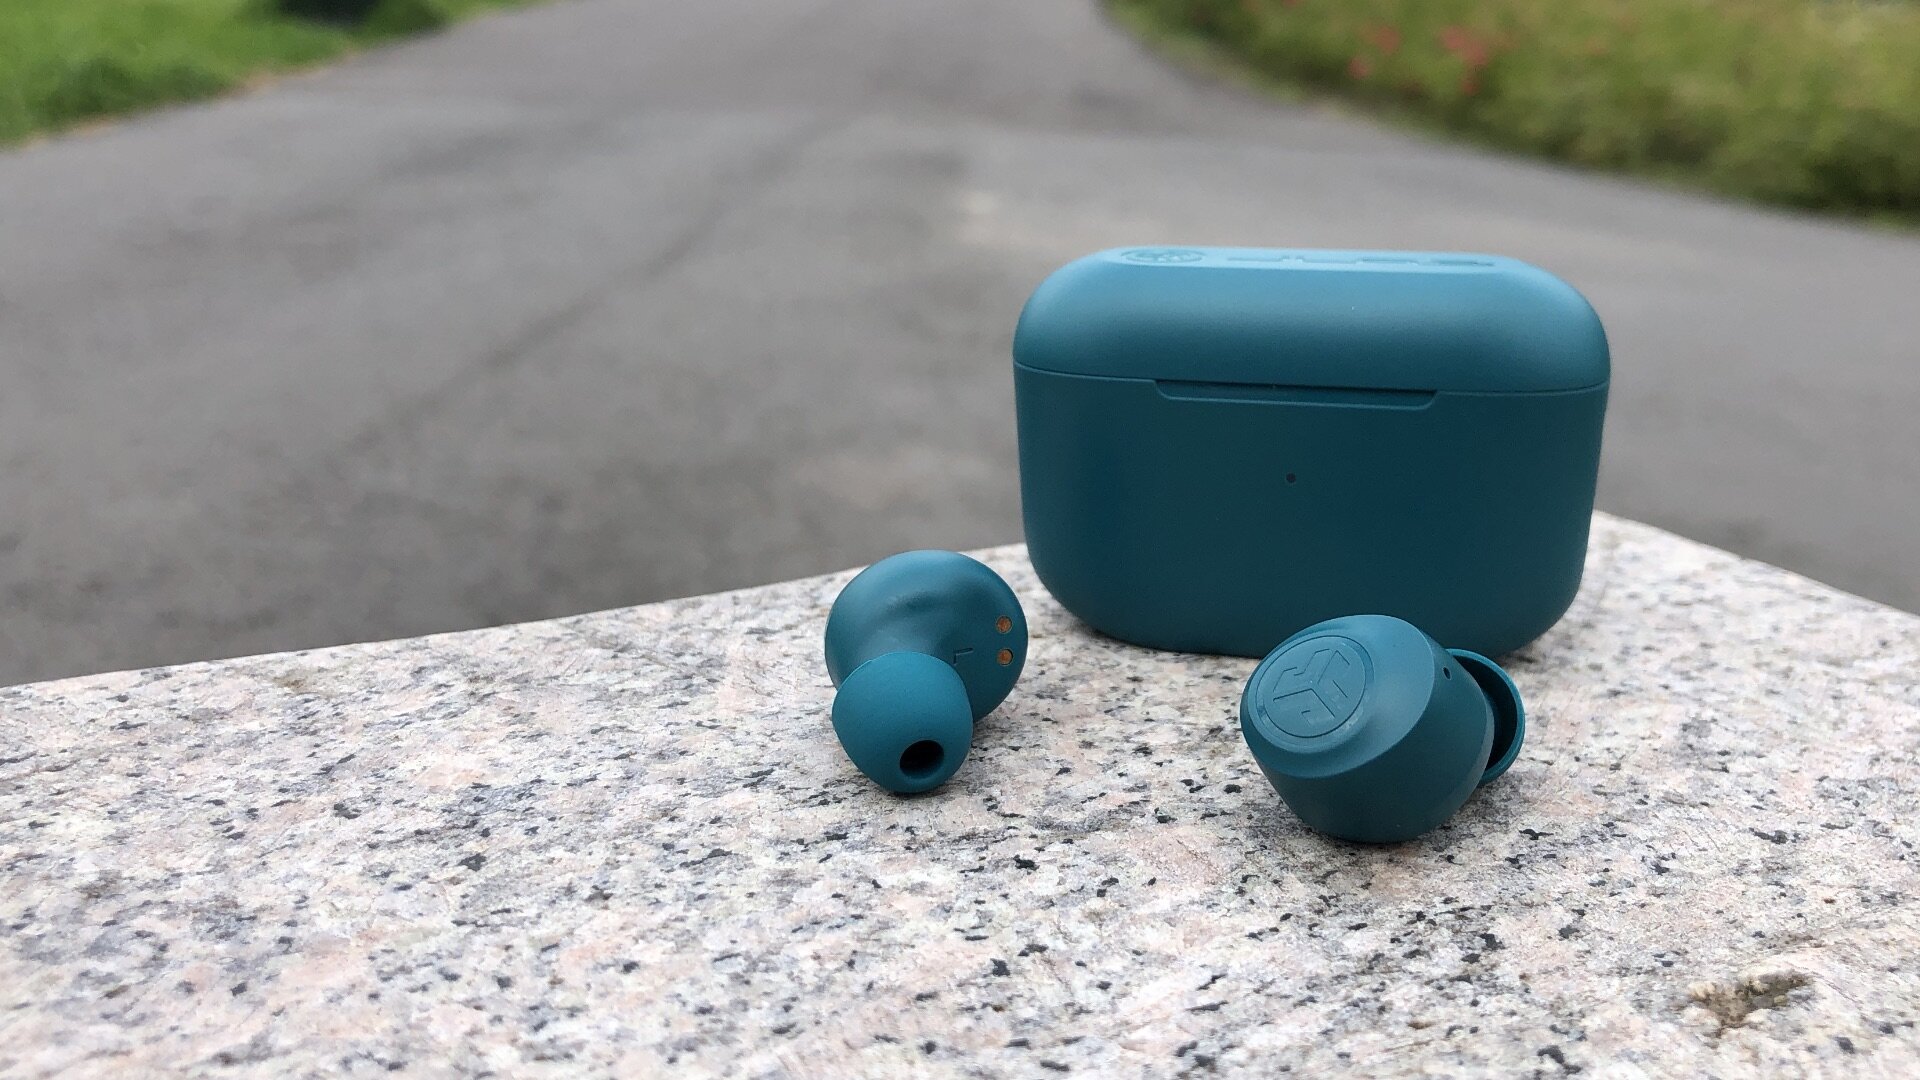 JLab Go Air Pop earbuds - perfect for sports enthusiasts